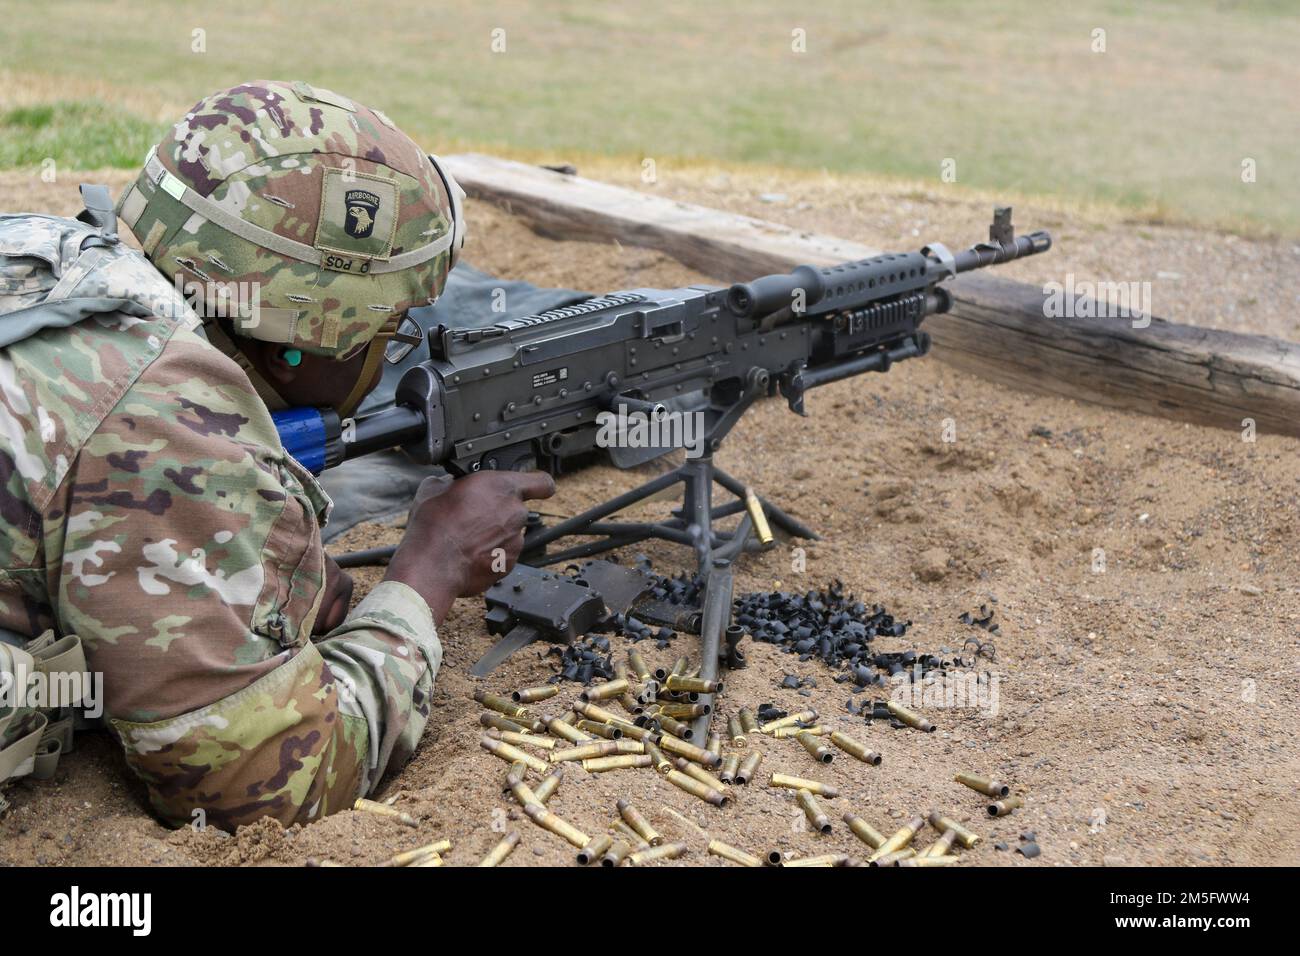 Pvt. Stanley Ubah, a Soldier assigned to Headquarters Support Company, Headquarters and Headquarters Battalion, 101st Airborne Division (Air Assault) qualified with the M240B on Fort Campbell, Ky March 16, 2022. Weapons proficiency is a vital aspect of mission readiness for Air Assault Soldiers. Stock Photo